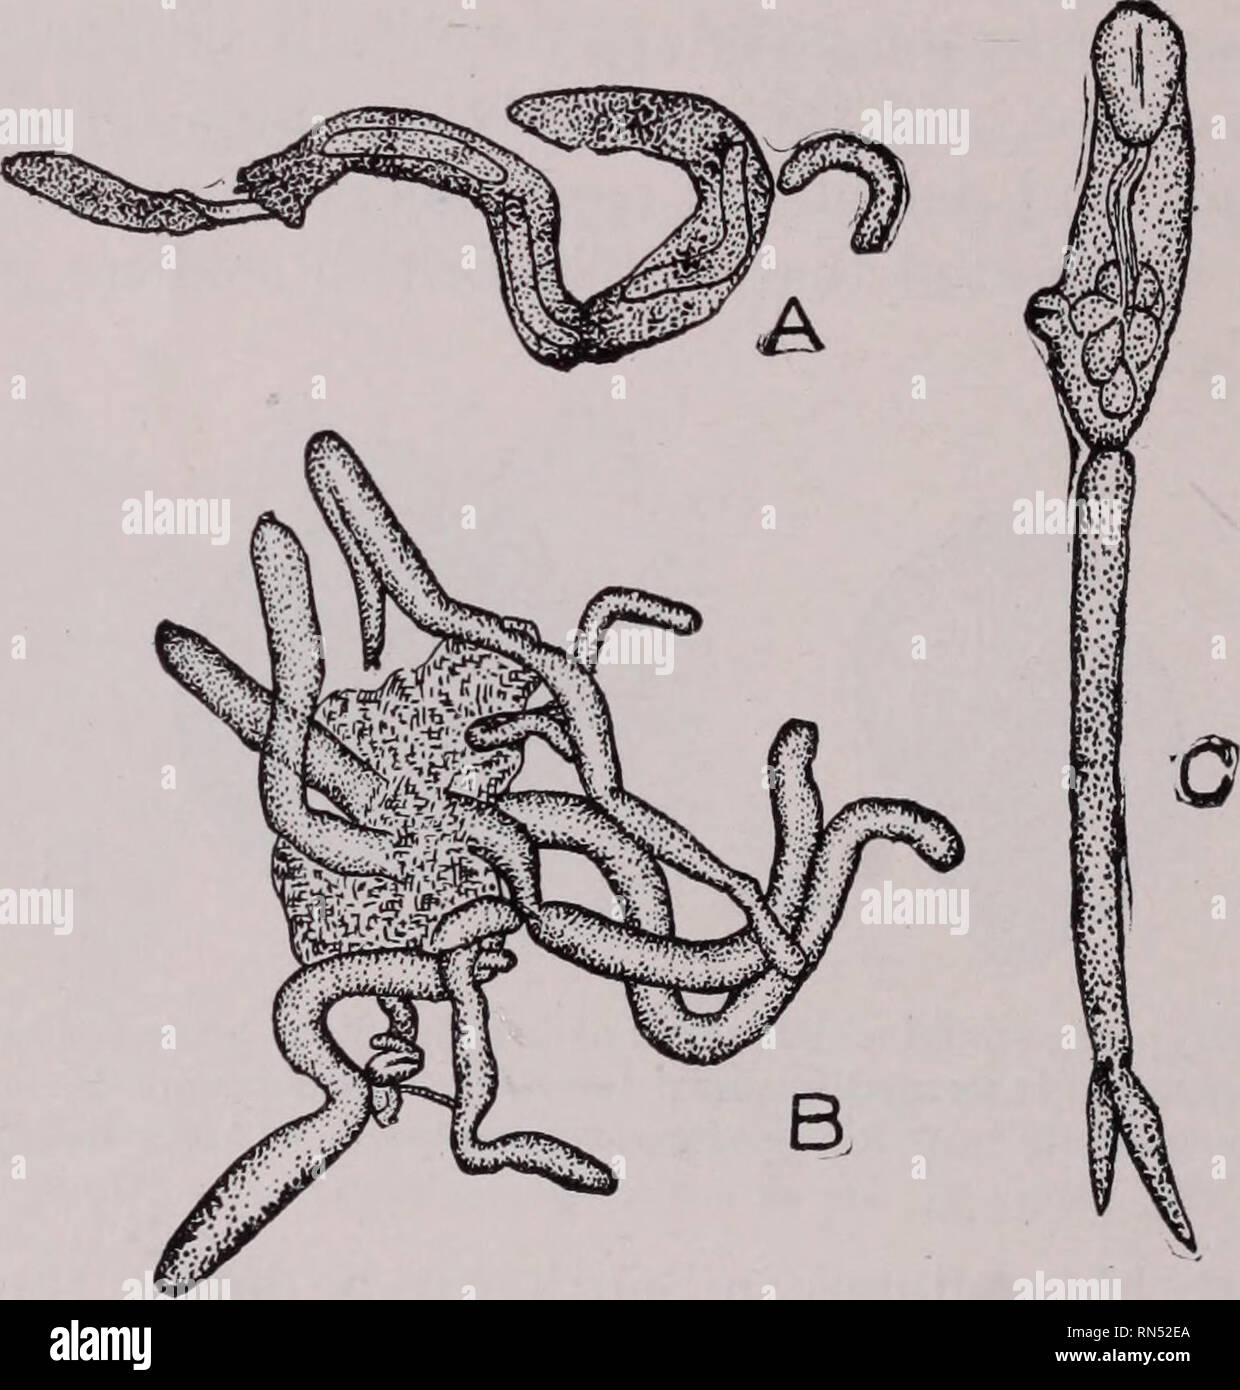 . Animal parasites and human disease. Insect Vectors; Parasites; Parasitic Diseases; Medical parasitology; Insects as carriers of disease. 214 THE FLUKES worked on the life history of this species, chiefly at El Marg, near Cairo, Egypt. He found that Schistosoma embryos are attracted by several species of fresh-water snails and that they penetrate the bodies of three species, Bullinus contortus (Fig. 66A), B. dybowskii and Planorbis boissyi (Fig. 66B). Here they undergo transformation into sporocysts, from which daugh- ter sporocysts bud off (Fig. 67). After leaving the mother cyst the daughte Stock Photo